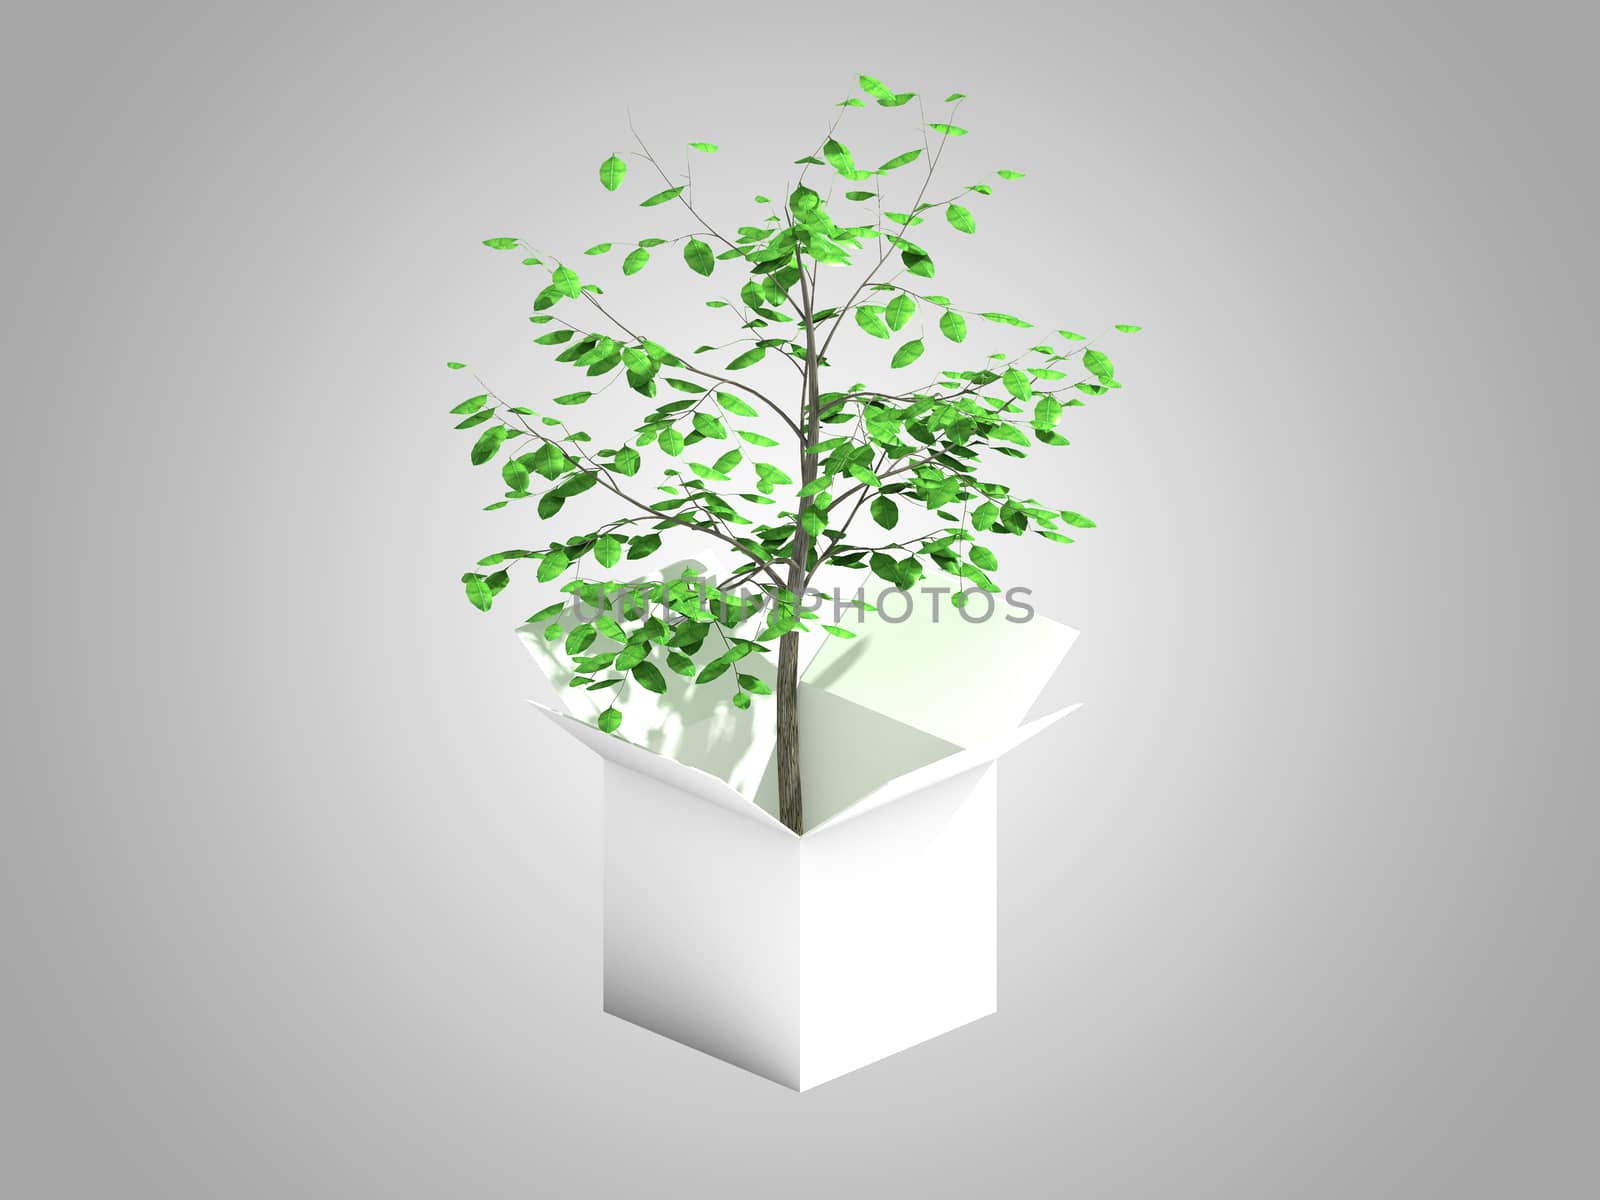 A tree growing from a white cardboard box  by teerawit